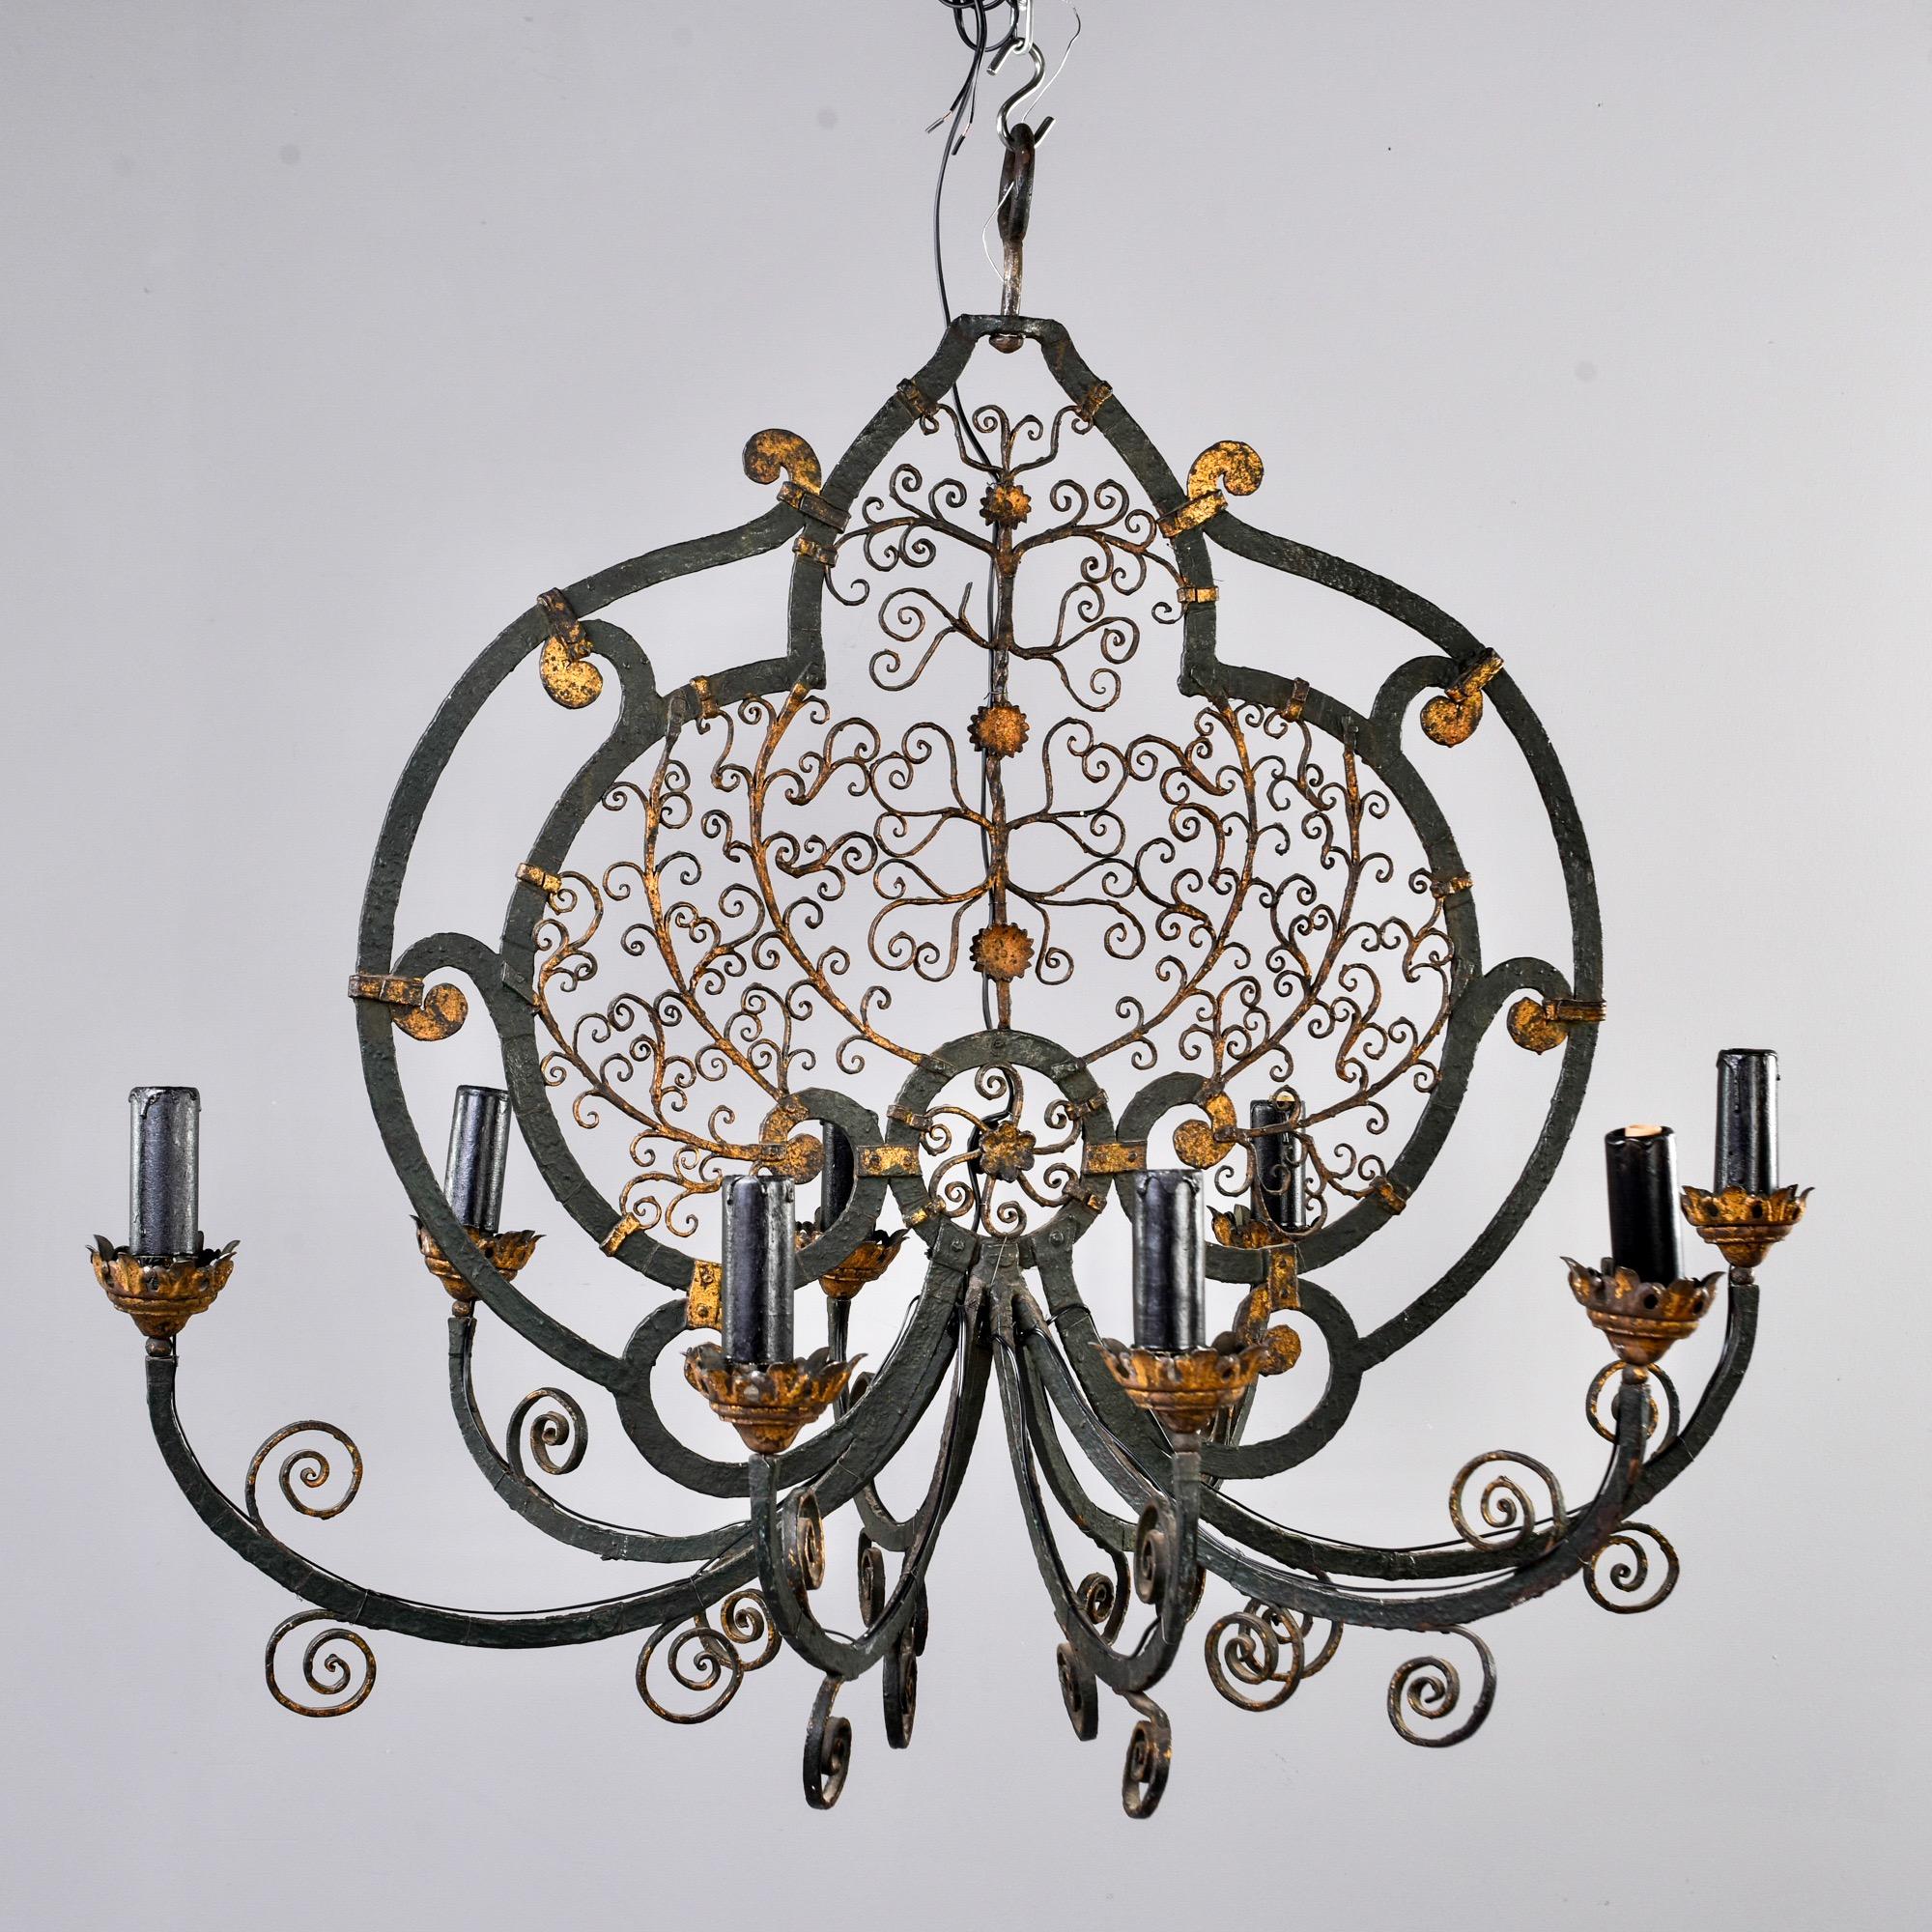 French black iron chandelier features fancy scroll work with gilded accents and eight arms with candle-style lights circa 1900s. Unknown maker. New wiring for US electrical standards. 

# of Sockets: 8
Socket size: Candelabra.